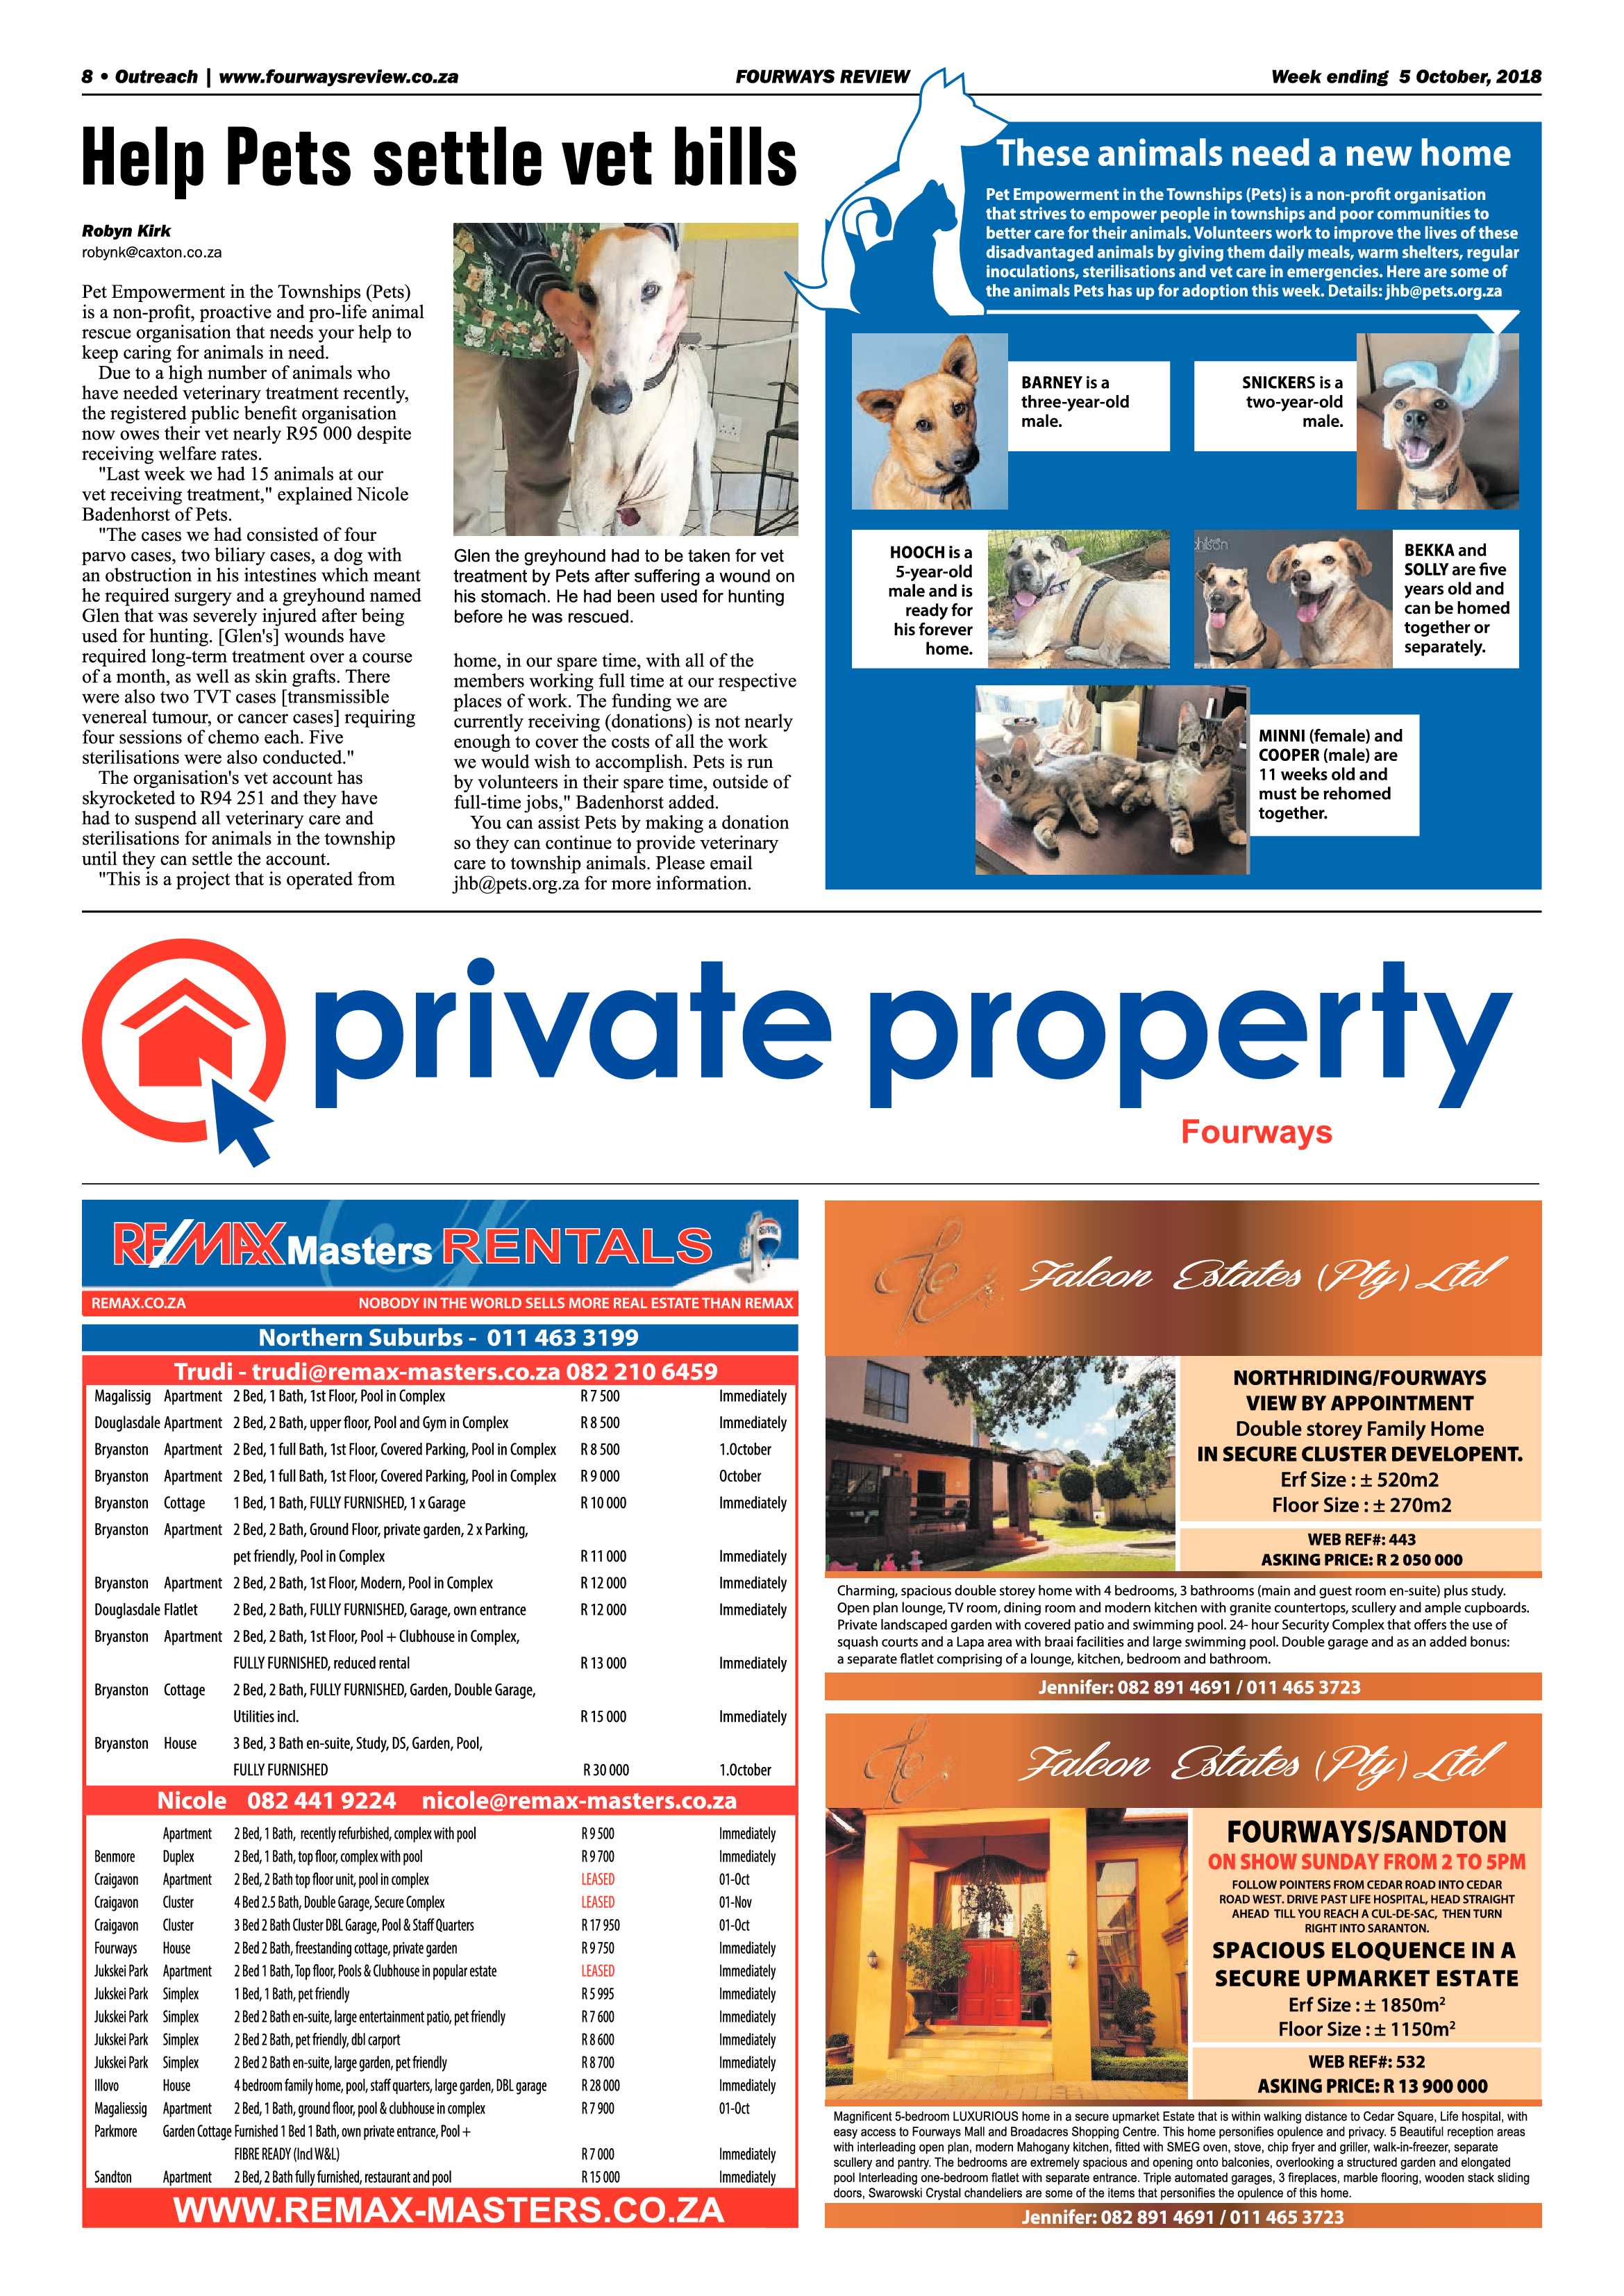 Fourways Review 5 October, 2018 page 8